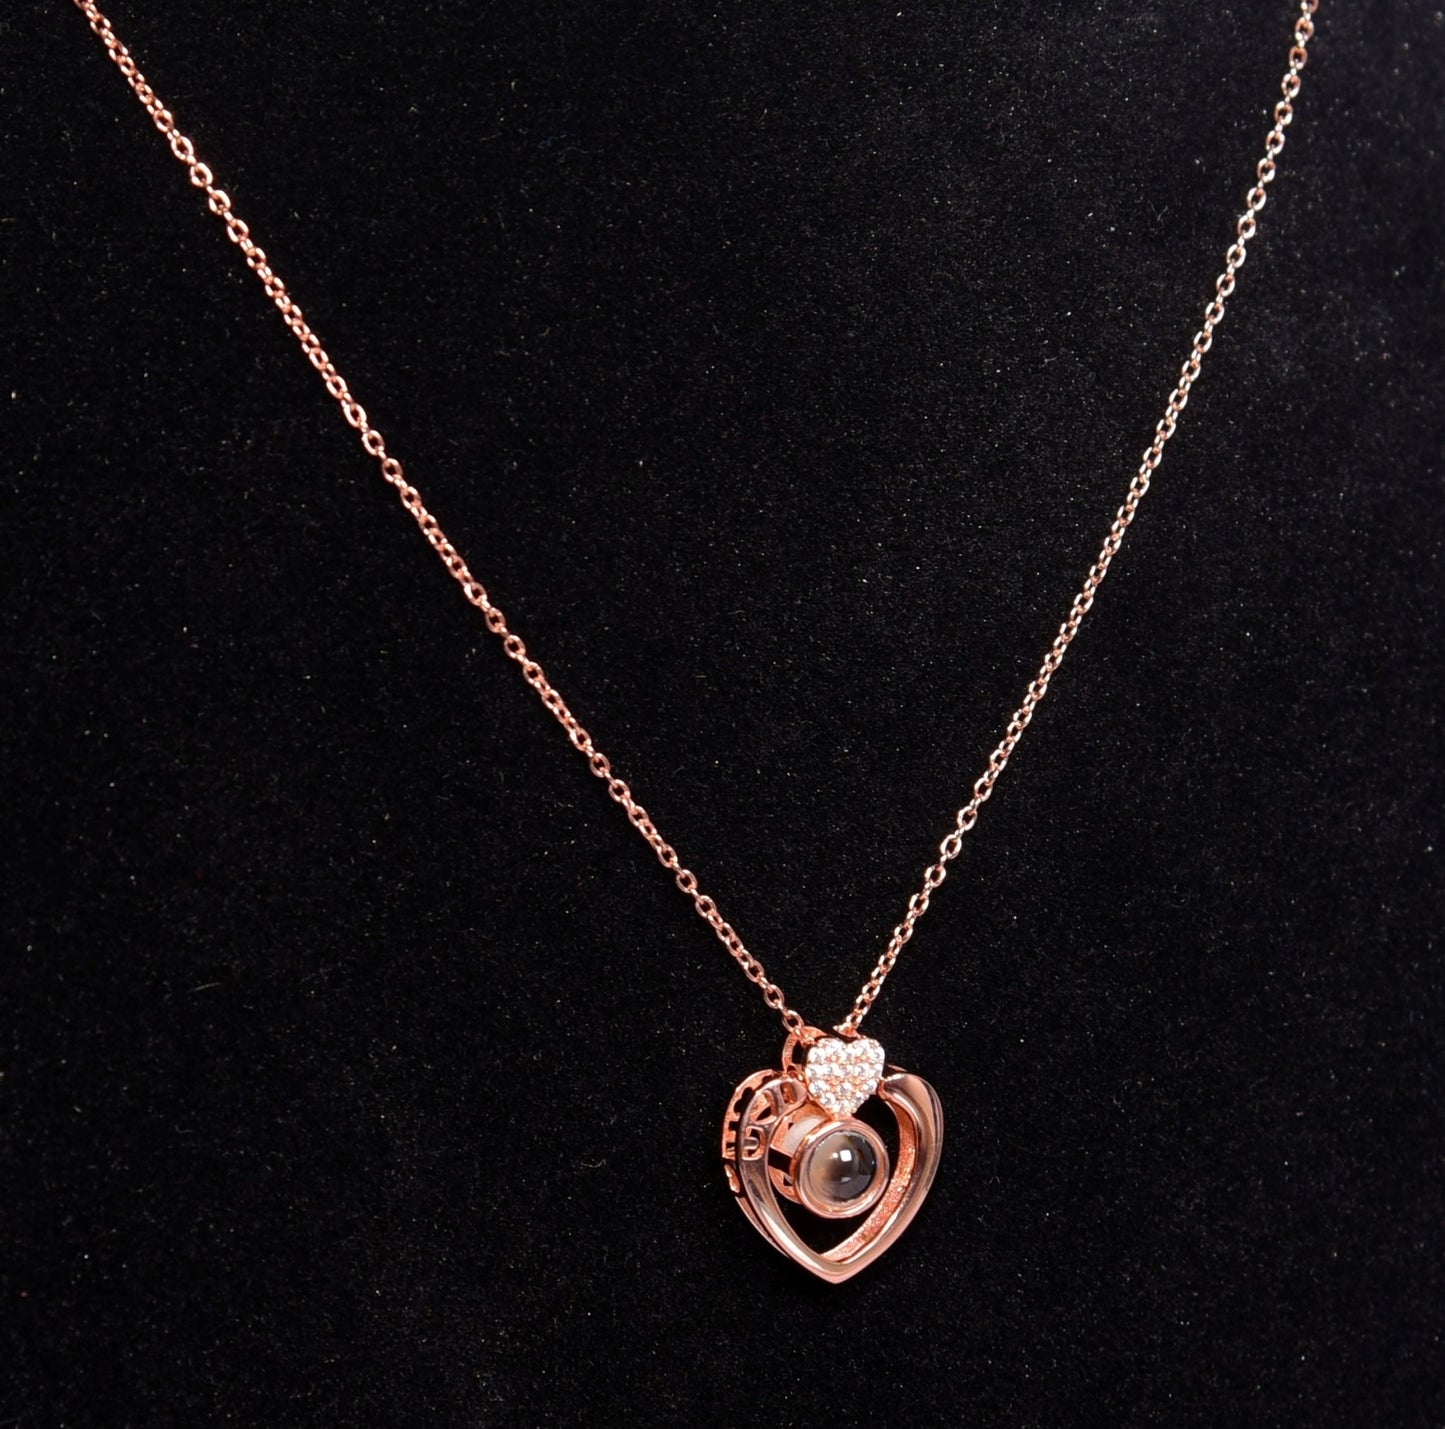 Silver Chain | Heart Eye Pendant | Rose Gold Plated | Women's Chain - Indique